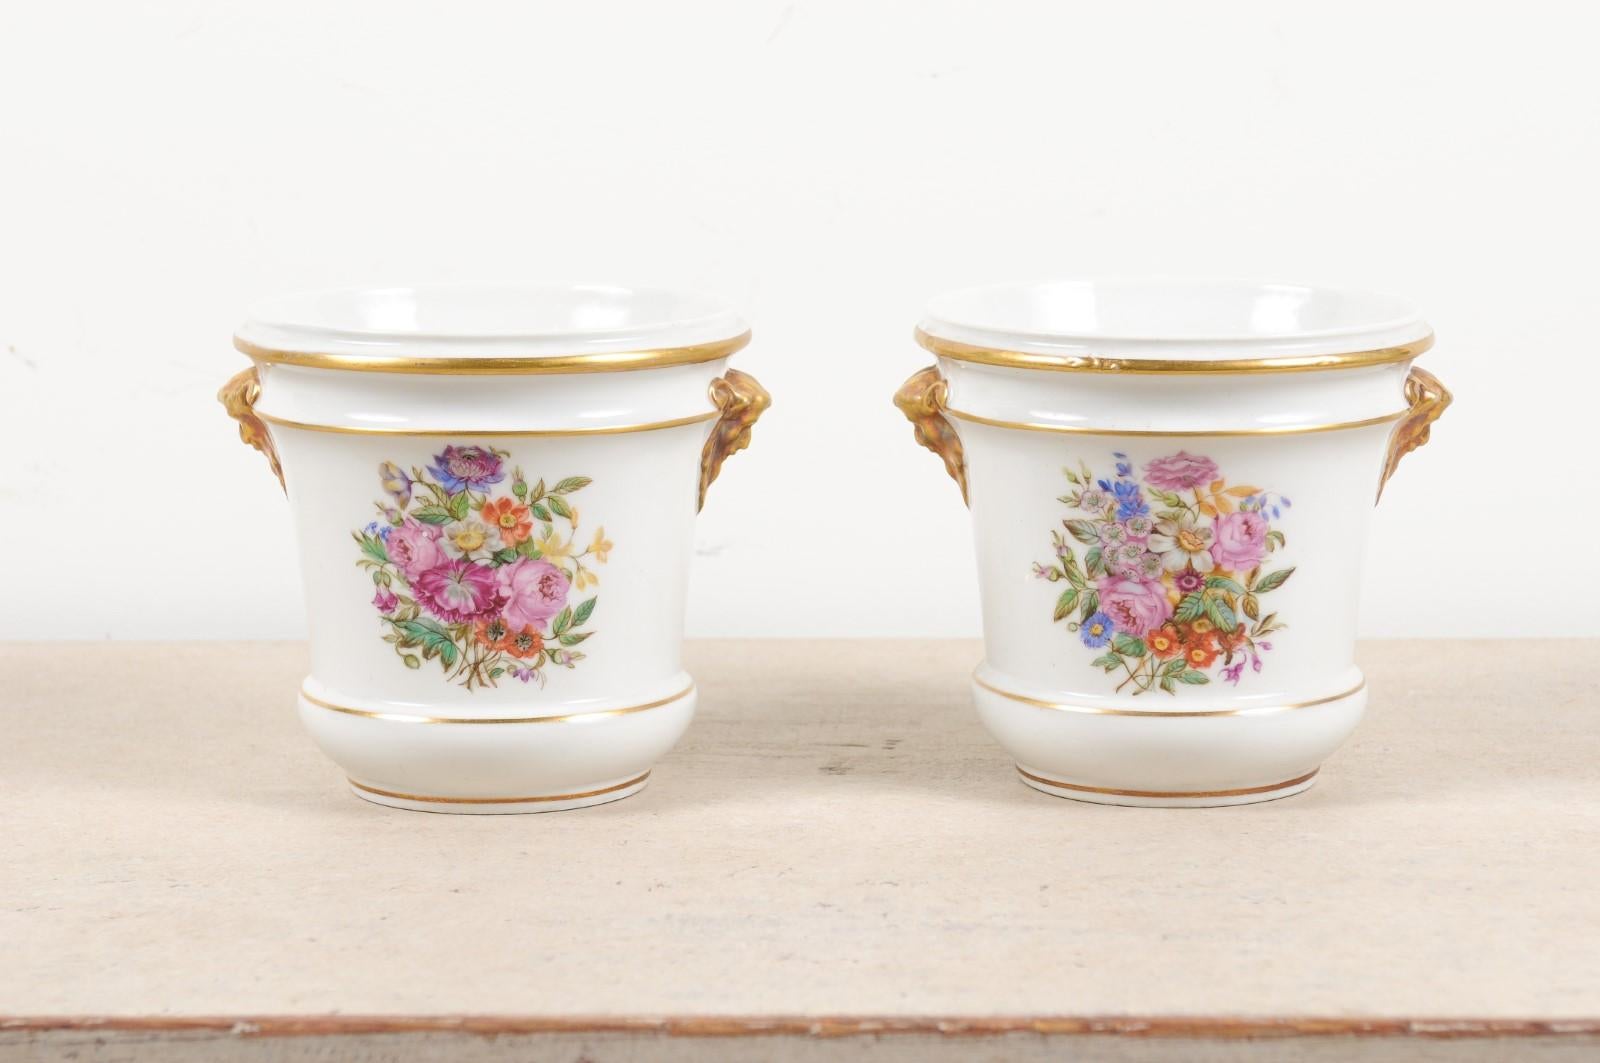 Pair of French Late 18th Century Paris Porcelain Cachepots with Floral Décor In Good Condition For Sale In Atlanta, GA